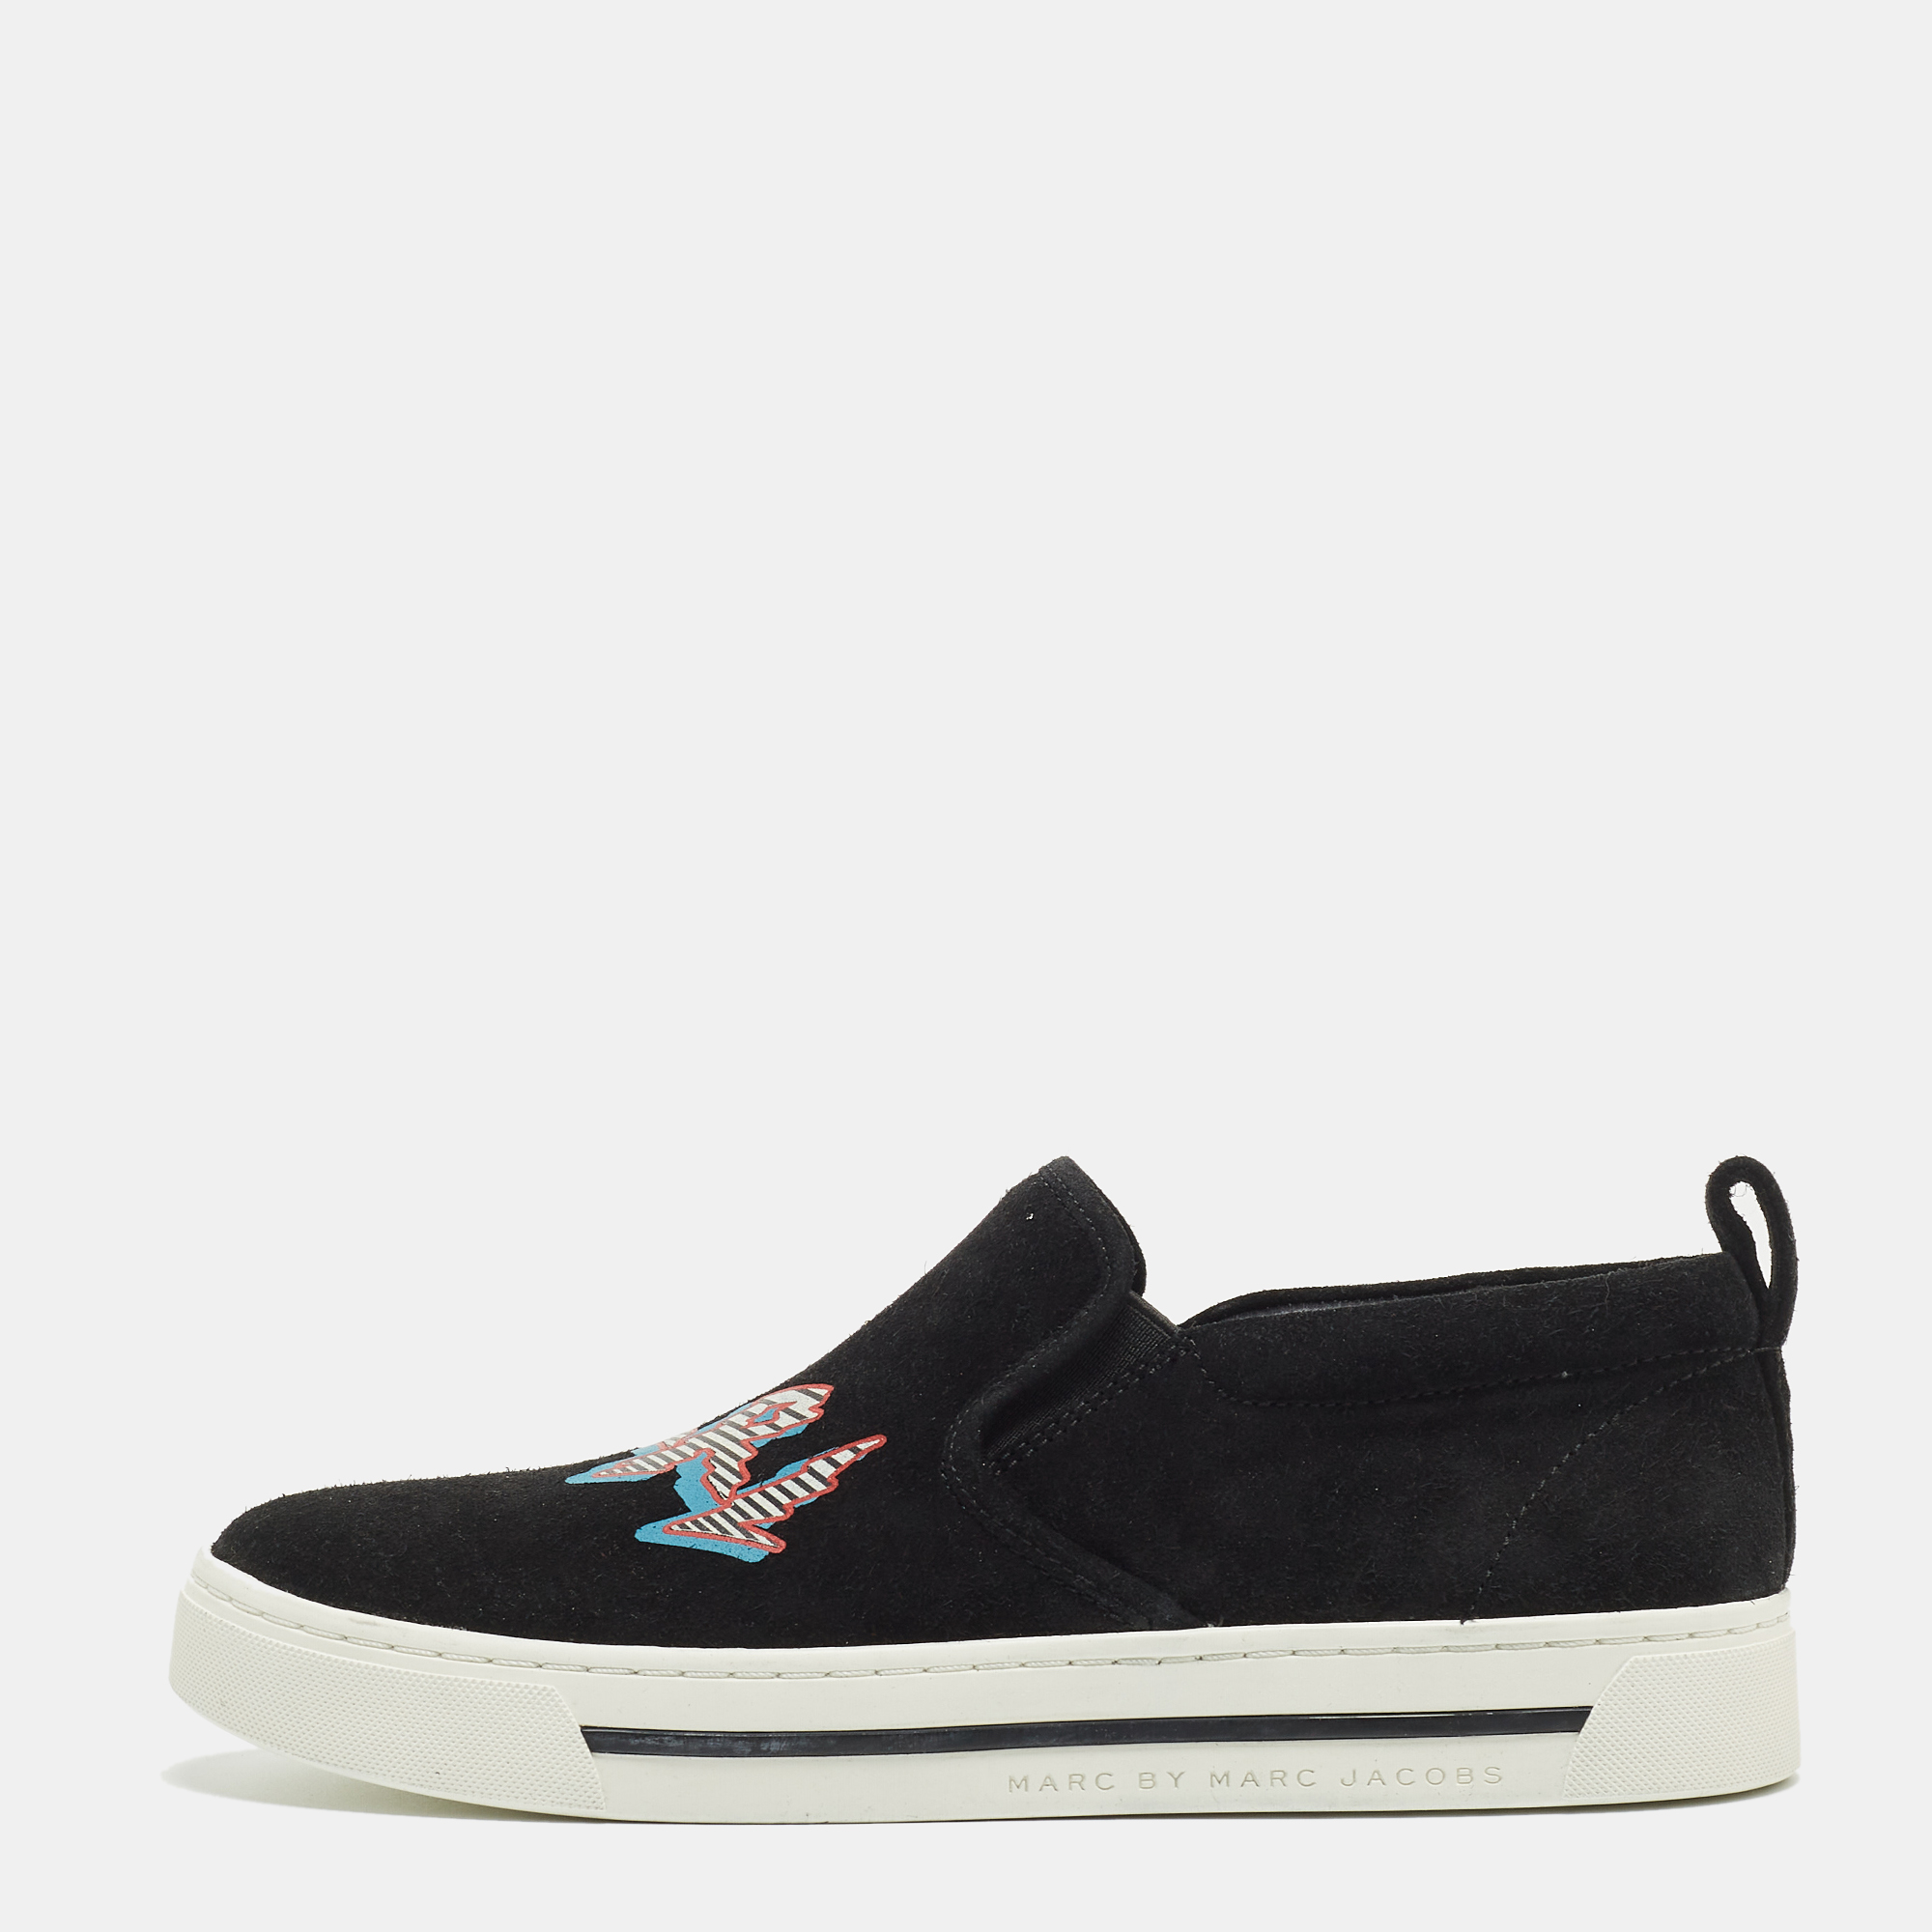 Marc By Marc Jacobs Black Suede GRRL Slip On Sneakers Size 37